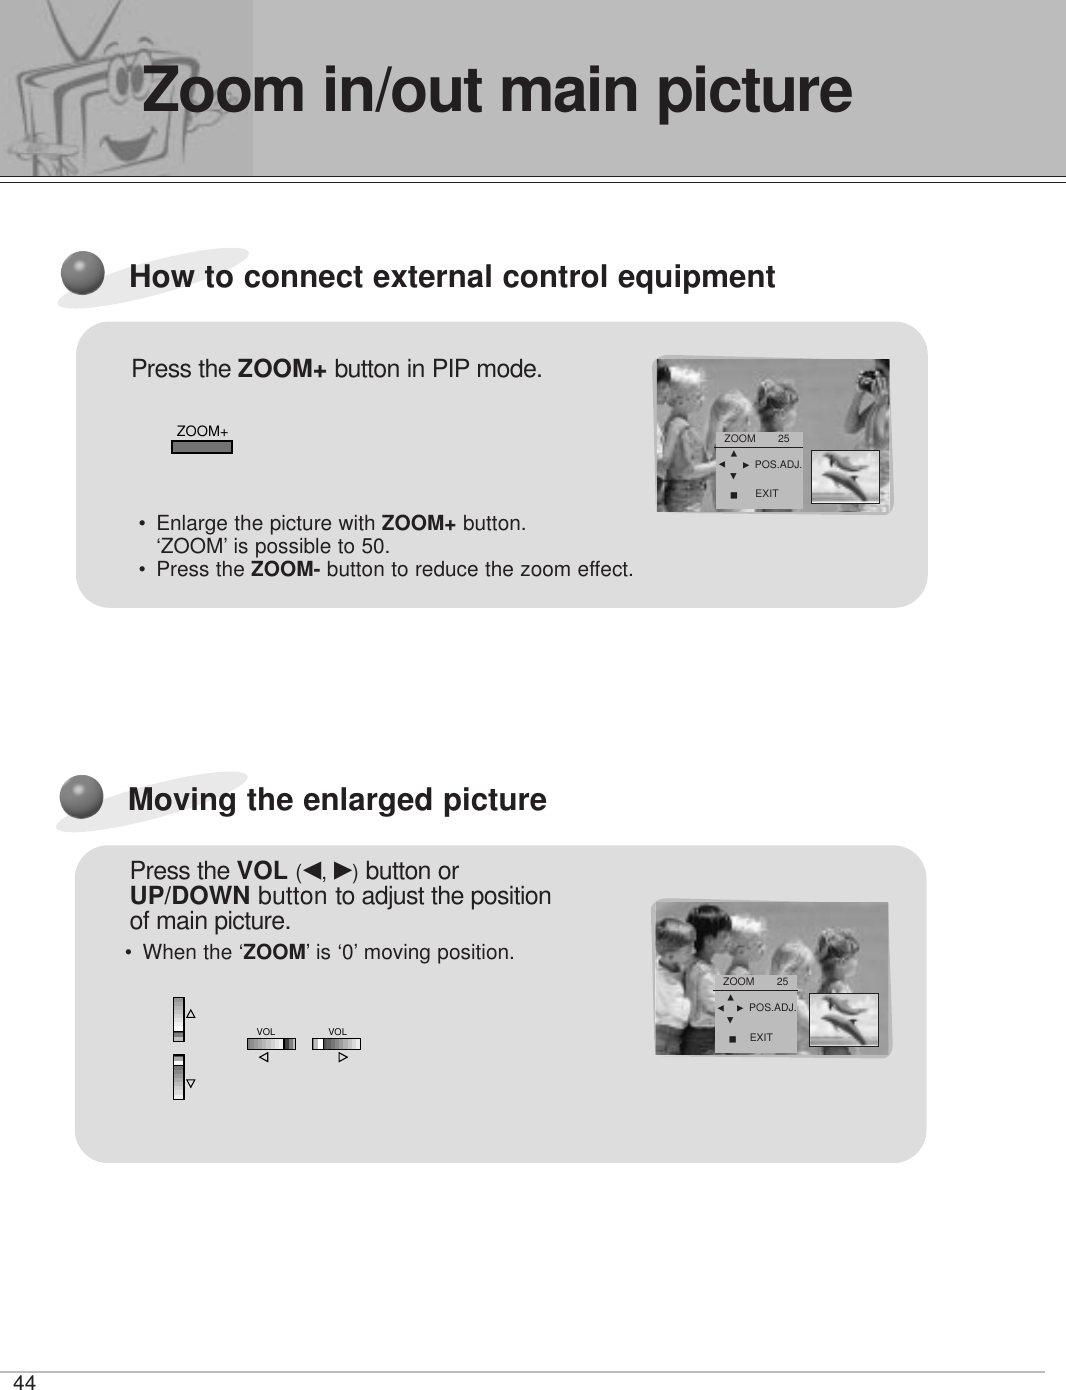 44How to connect external control equipmentPress the ZOOM+ button in PIP mode.ZOOM+•Enlarge the picture with ZOOM+ button.‘ZOOM’ is possible to 50.• Press the ZOOM- button to reduce the zoom effect.ZOOM       25FDEGAPOS.ADJ.EXITMoving the enlarged picturePress the VOL (F, G)button orUP/DOWN button to adjust the positionof main picture.•When the ‘ZOOM’ is ‘0’ moving position.ZOOM       25FDEGAPOS.ADJ.EXITVOLVOLZoom in/out main picture